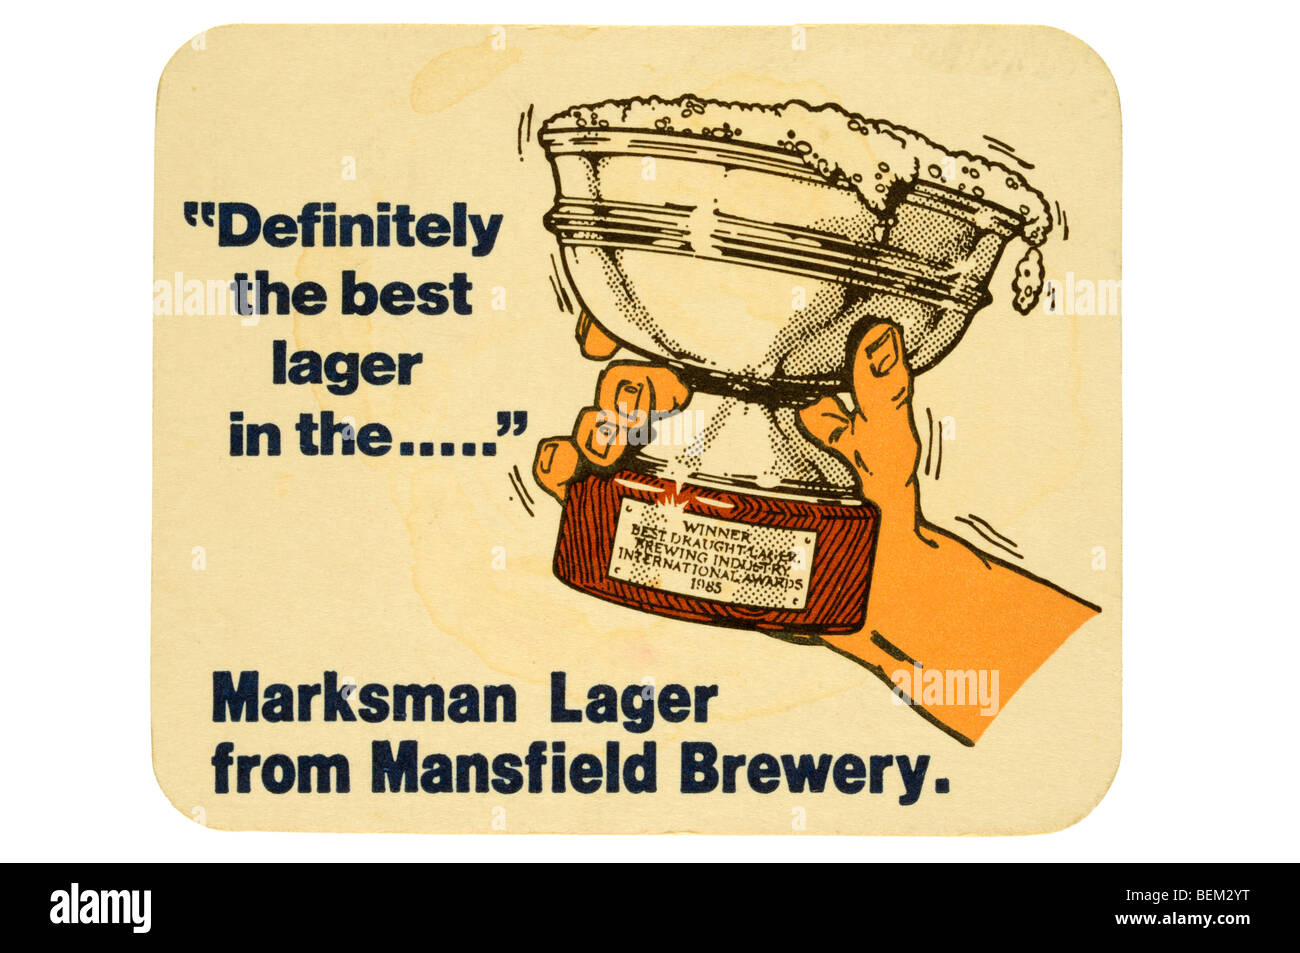 definitely the best lager in the marksman lager from mansfield brewery Stock Photo